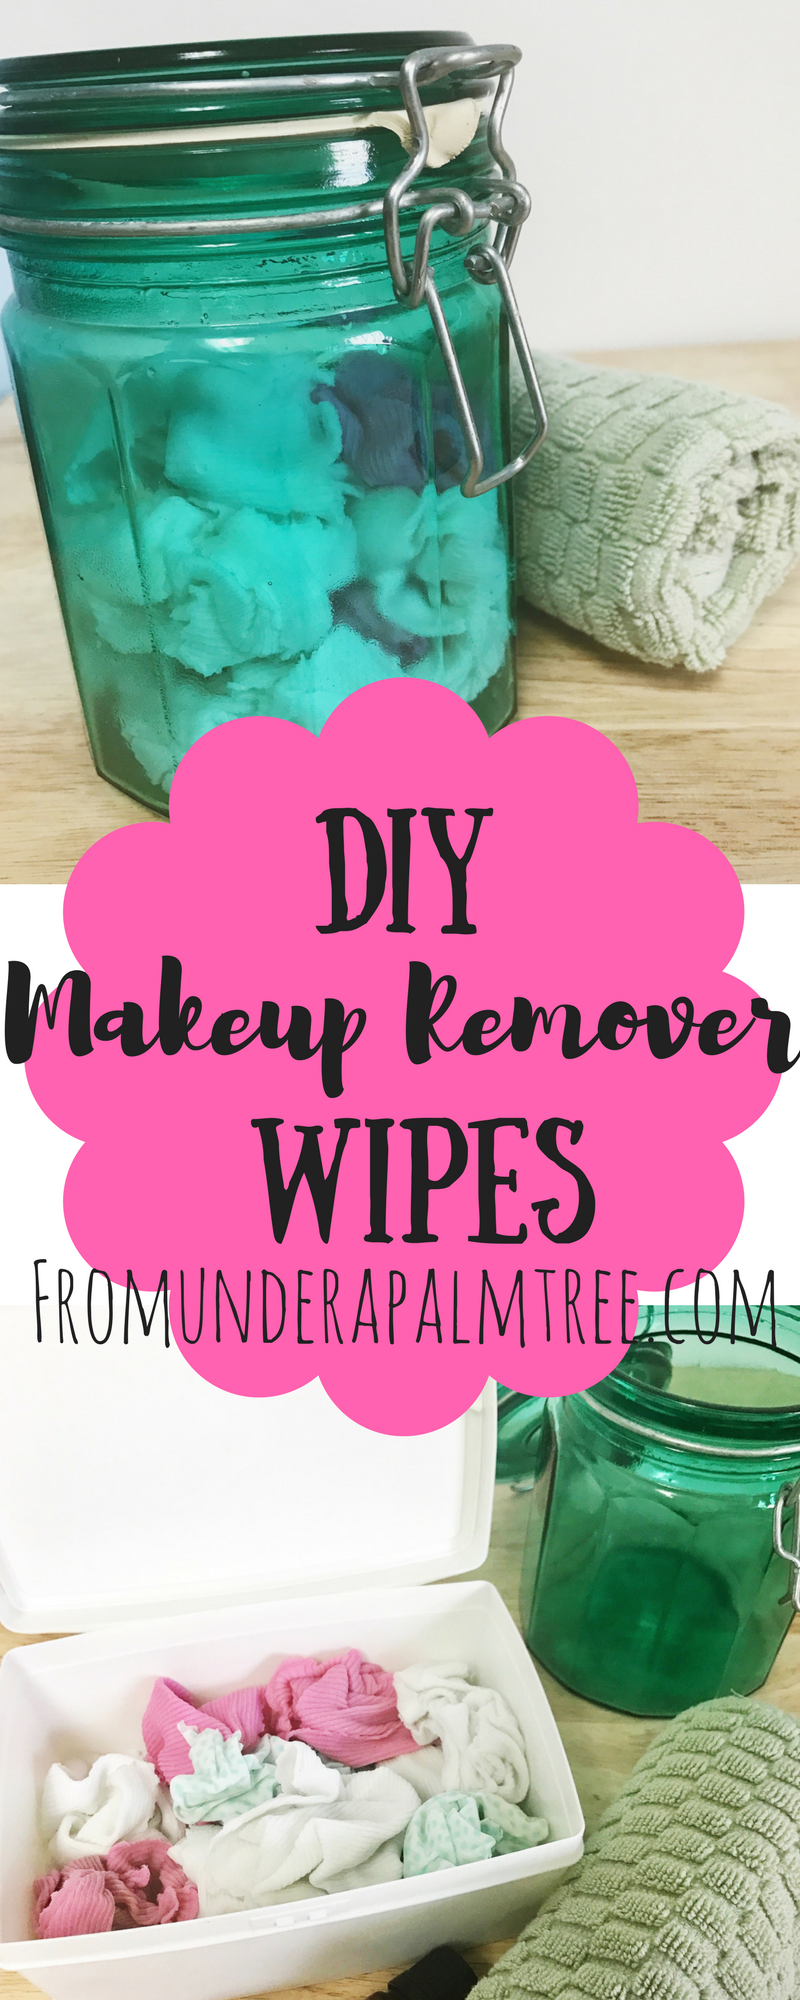 DIY Makeup Remover Wipes | Reusable Makeup Wipes | Washable Makeup Wipes | Makeup Remover Wipes | DIY beauty | face wipes | Easy Beauty DIY | Homemade makeup remover wipes | Sustainable living | Green living | 